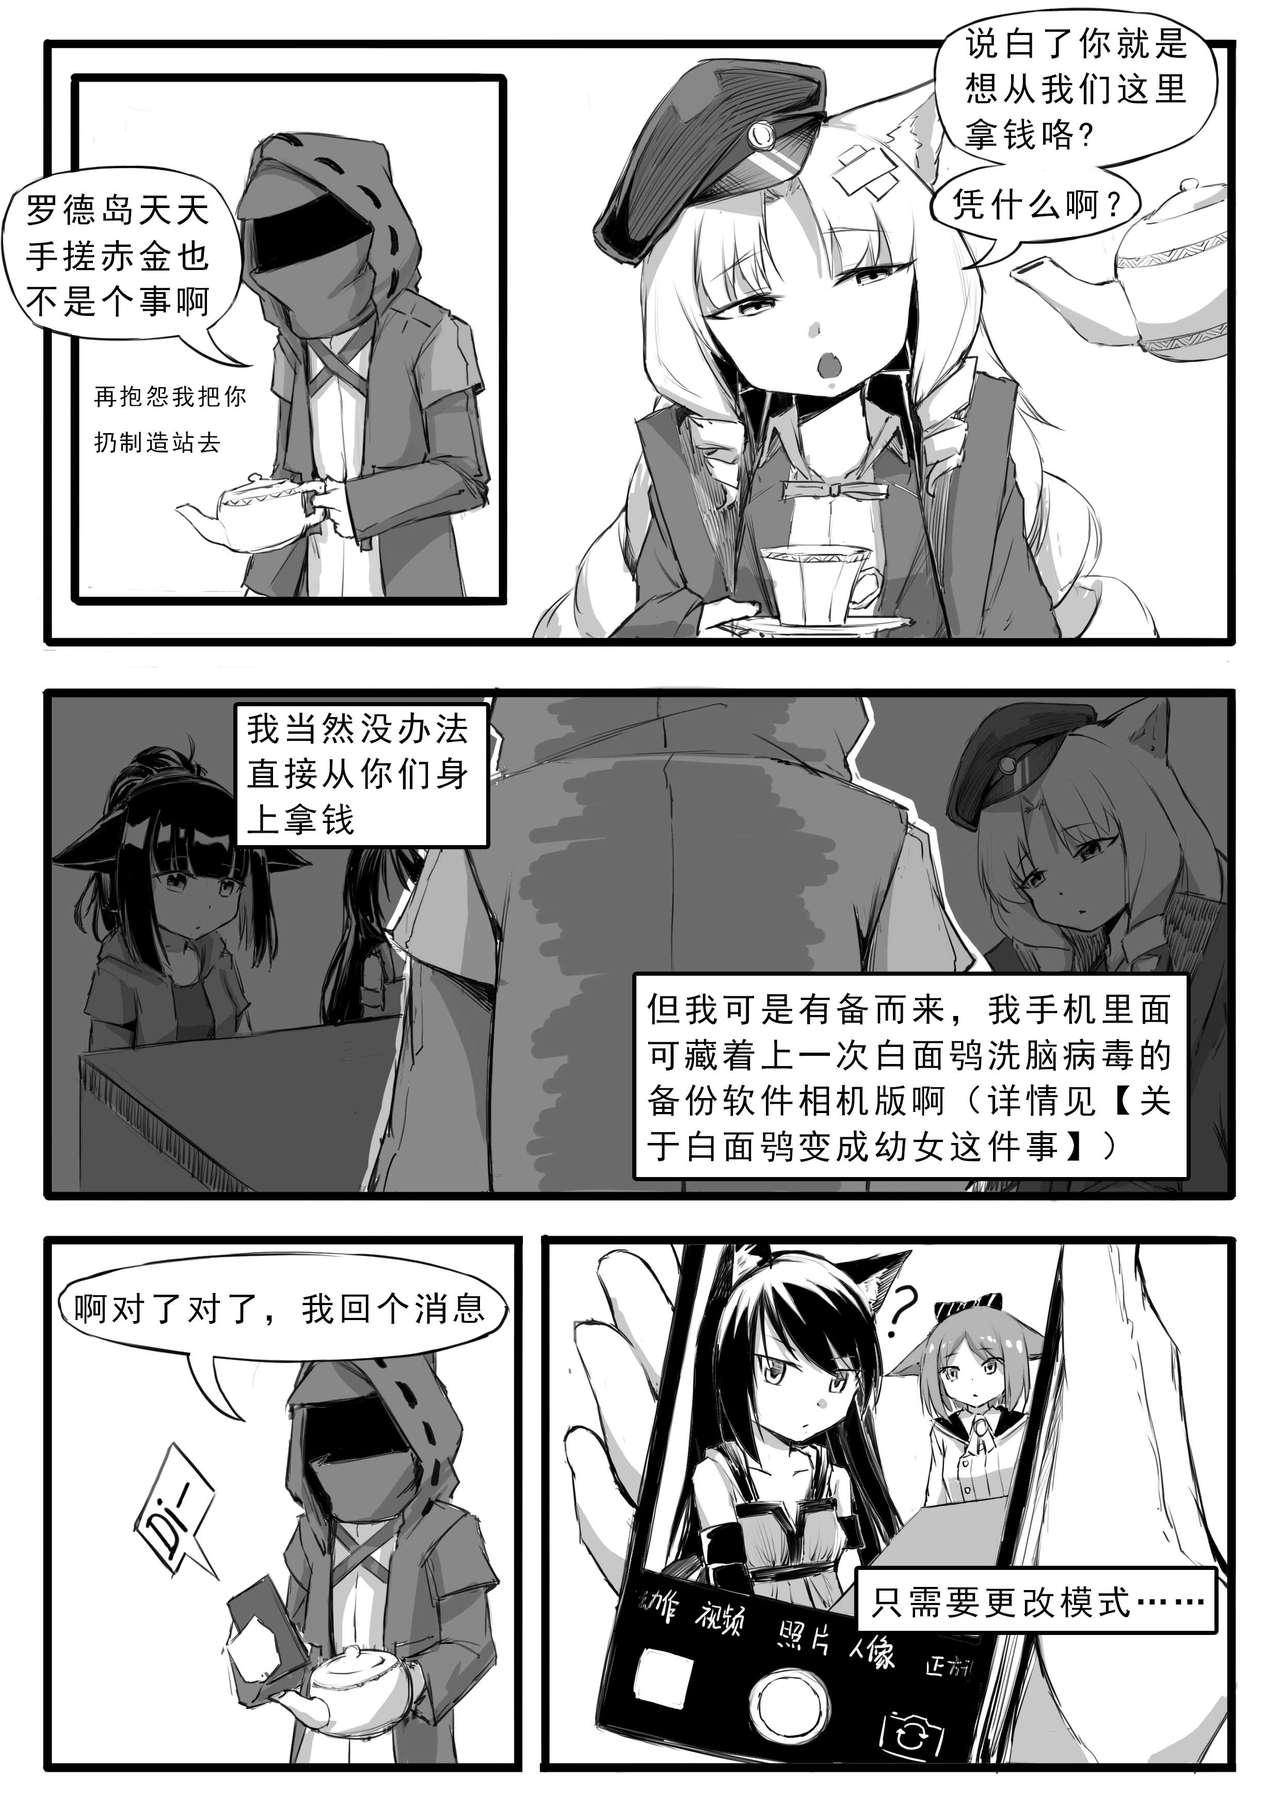 Gay Rimming 本博士不想努力了 - Arknights Women Sucking Dick - Page 5